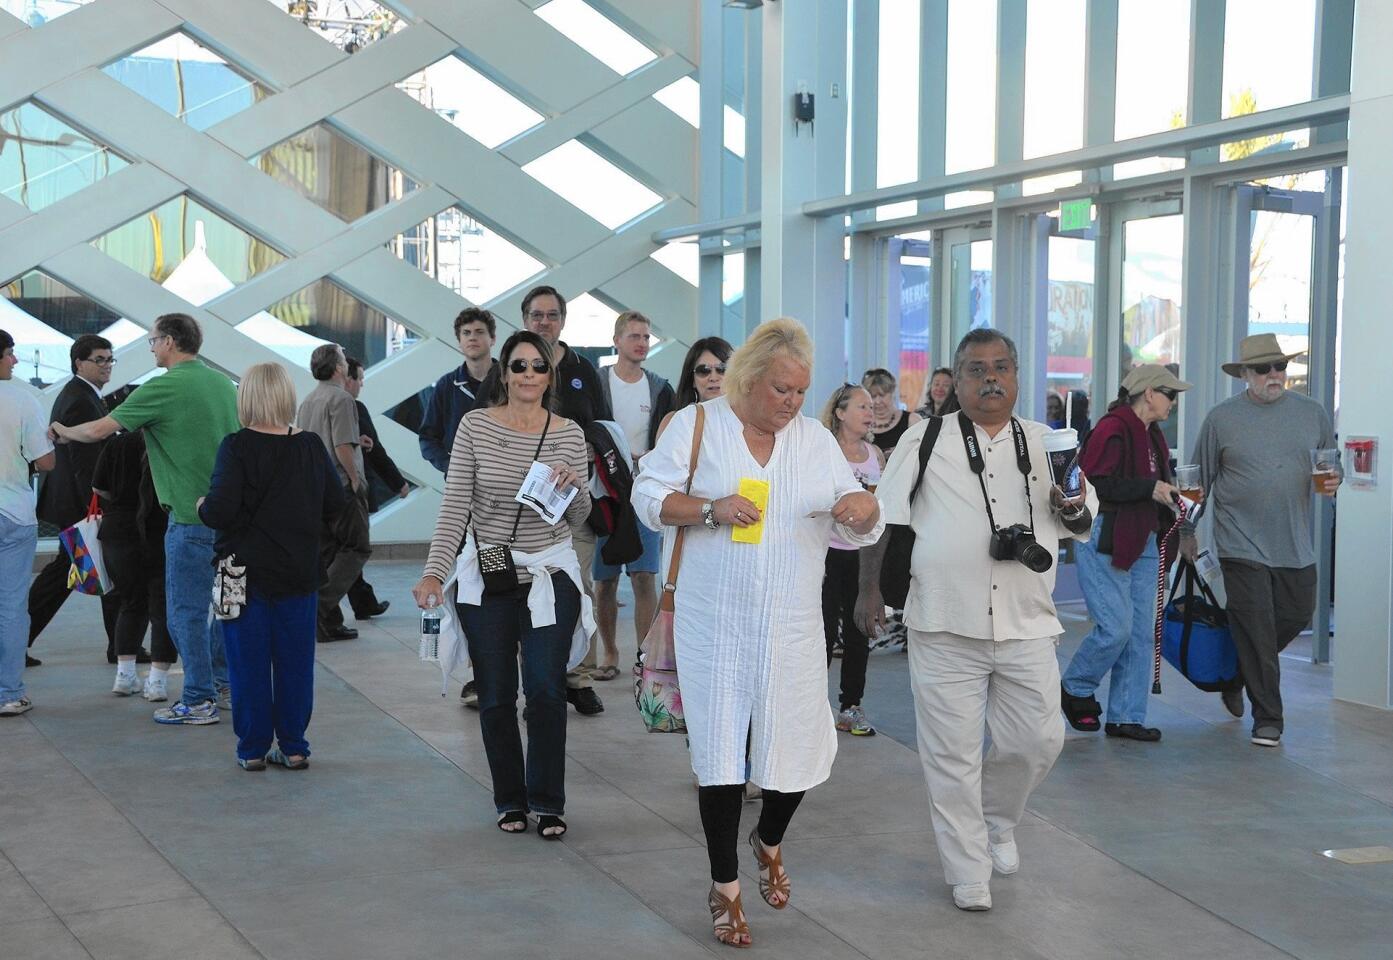 Concert attendees make their way into the newly constructed Plaza Pacifica on Thursday. The plaza is a new entrance area and lobby for the Pacific Amphitheatre.